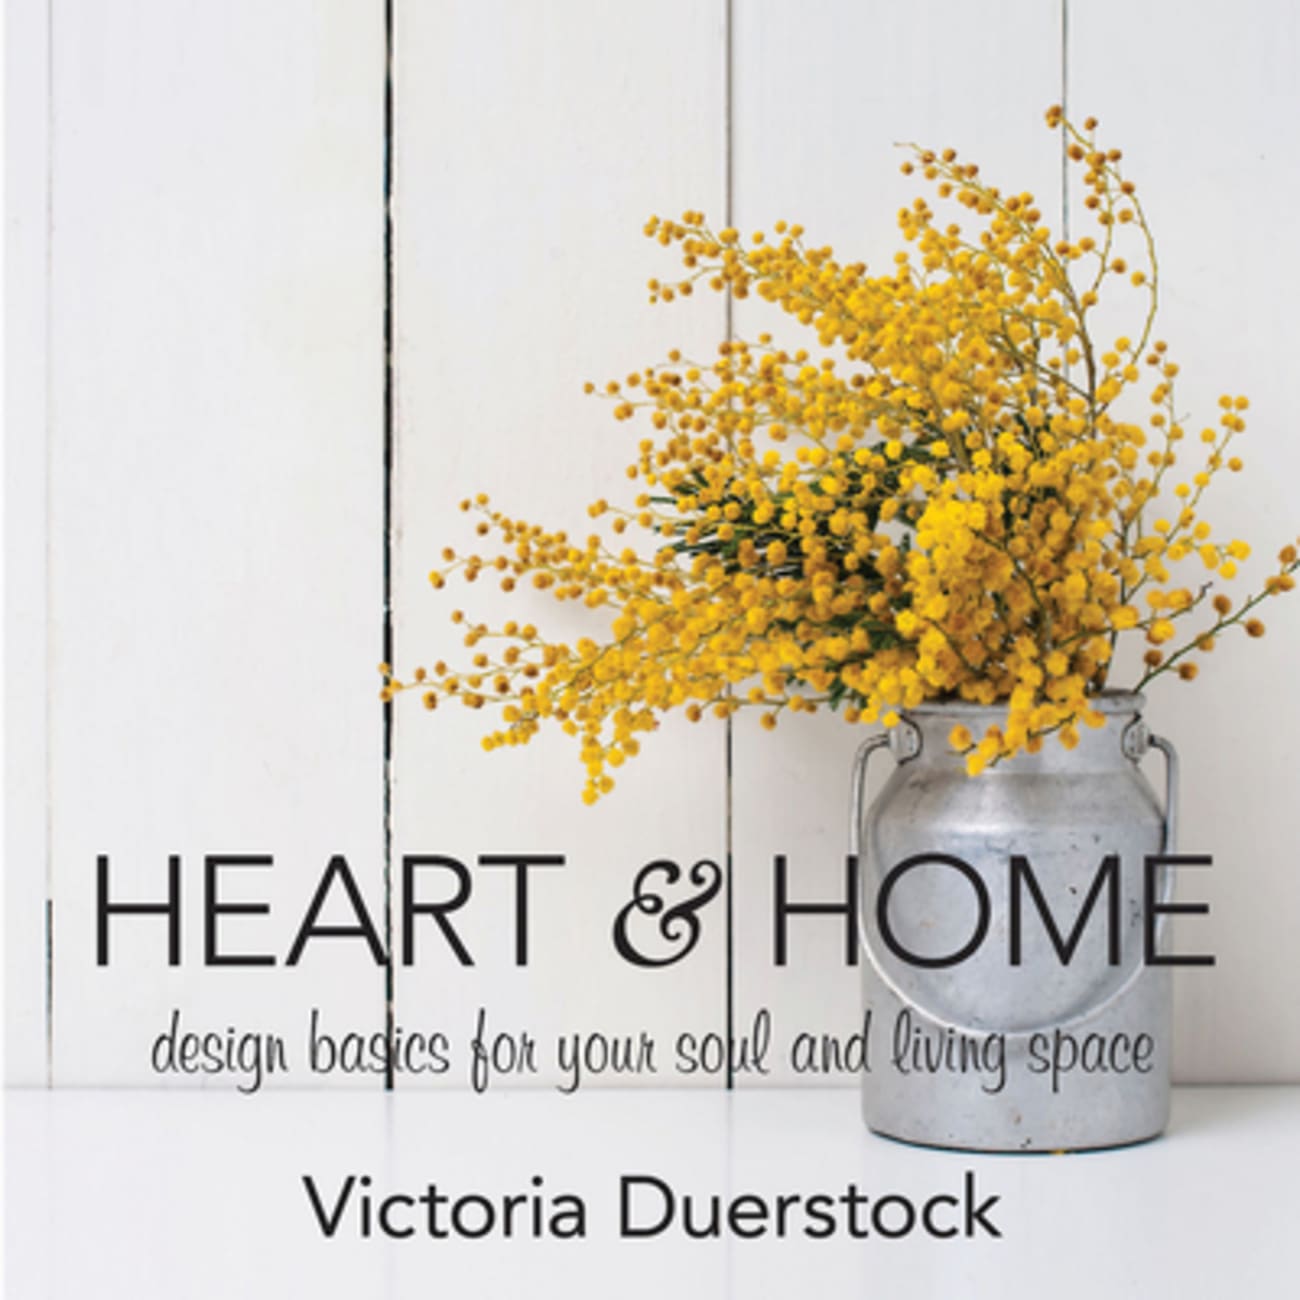 Heart & Home: Design Basics For Your Soul and Living Space Hardback